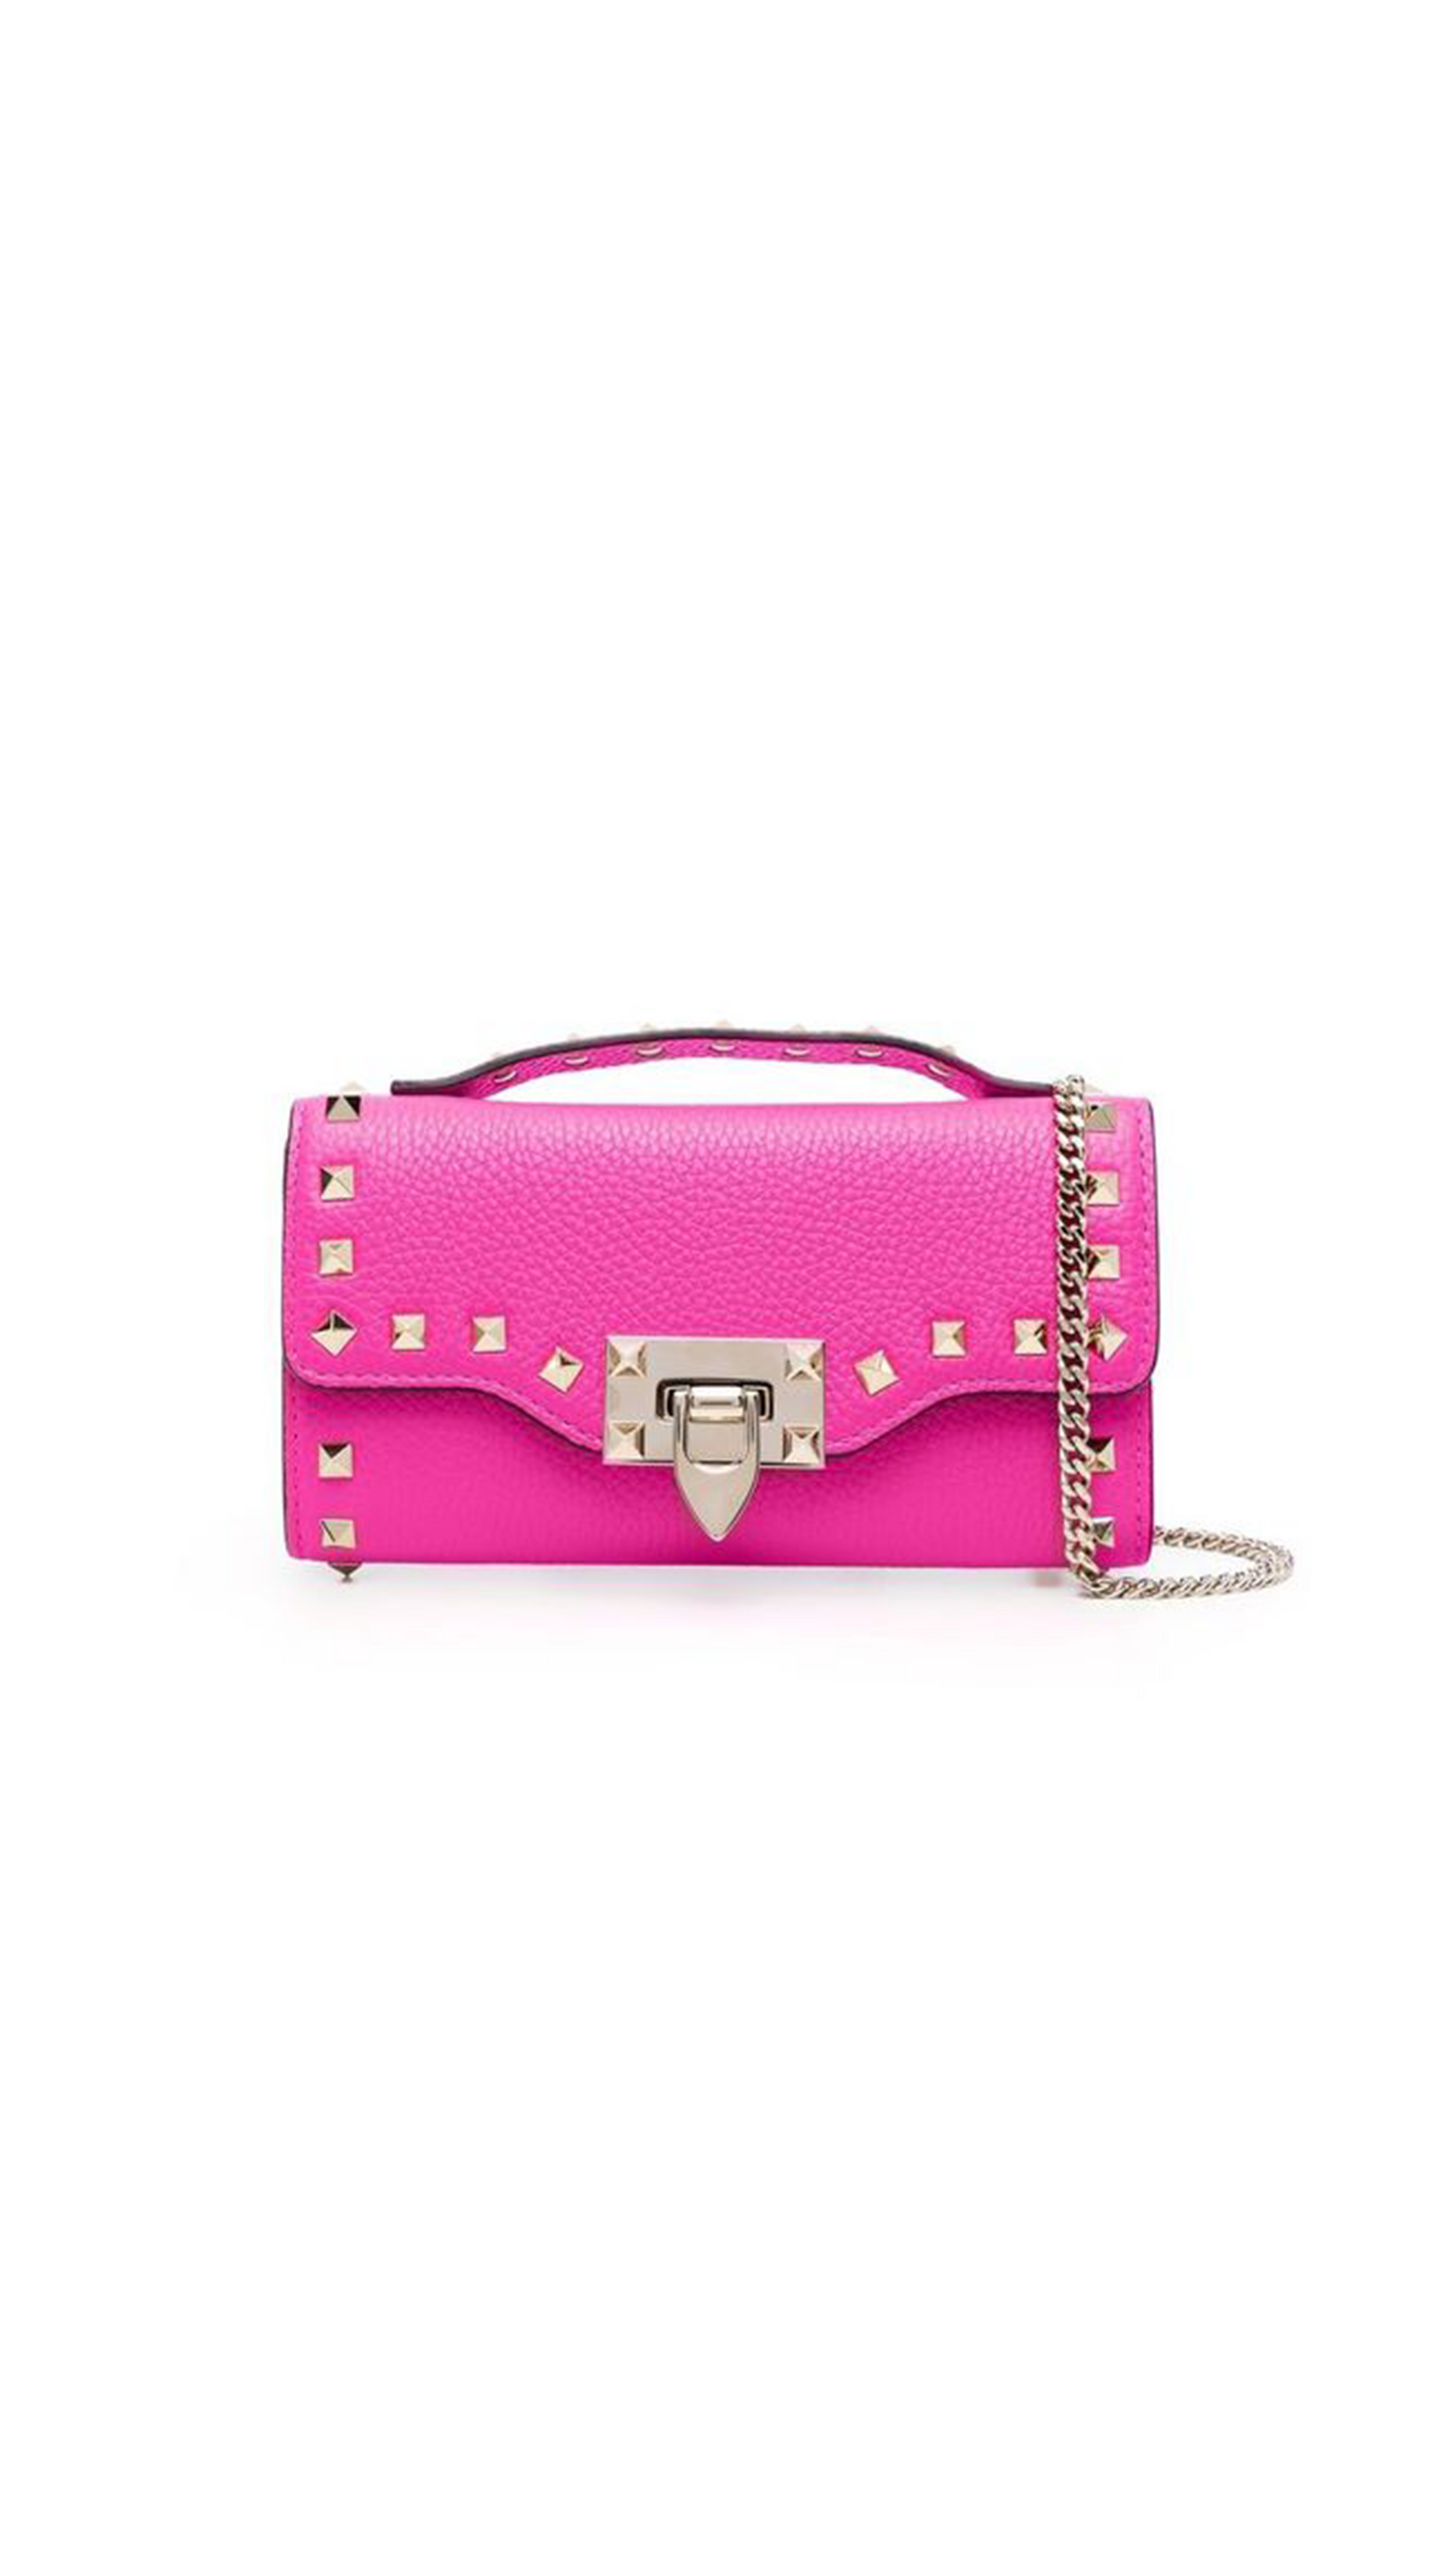 Rockstud Grainy Calfskin Wallet With Chain Strap - Pink PP